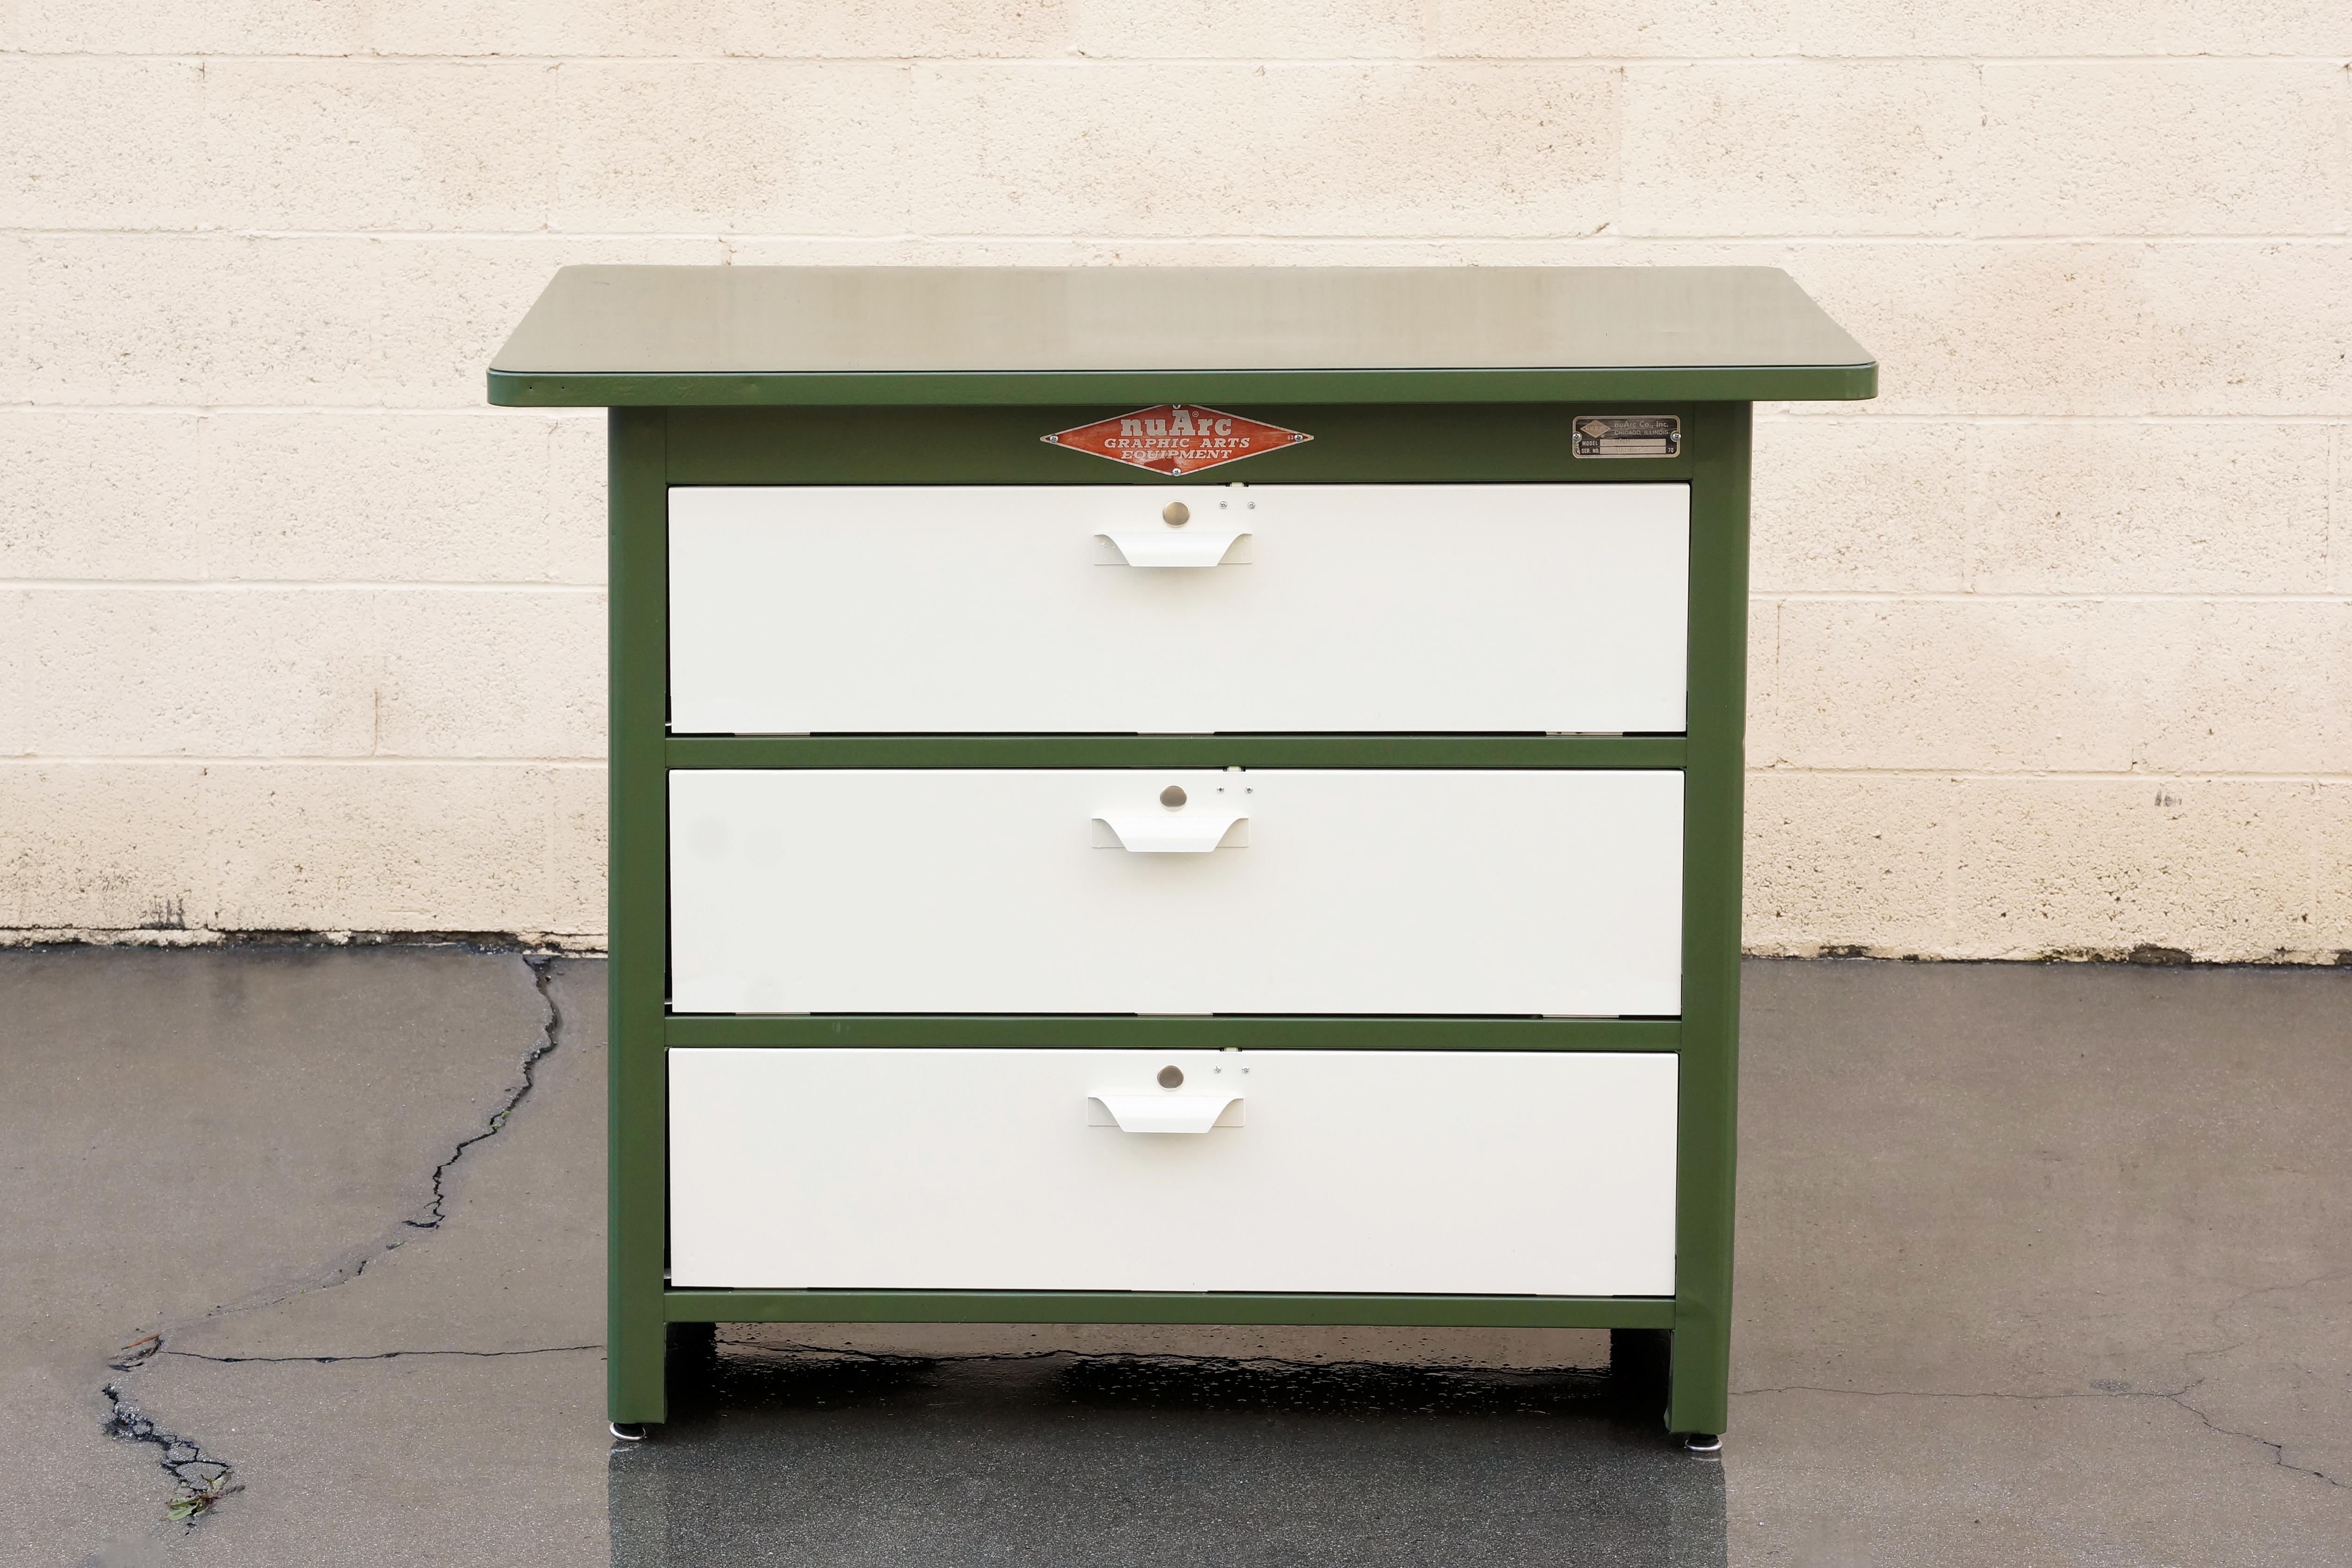 Mid-Century Modern 1960s Tool Cabinet by Nuarc Graphic Arts Equipment, Refinished in Army Green